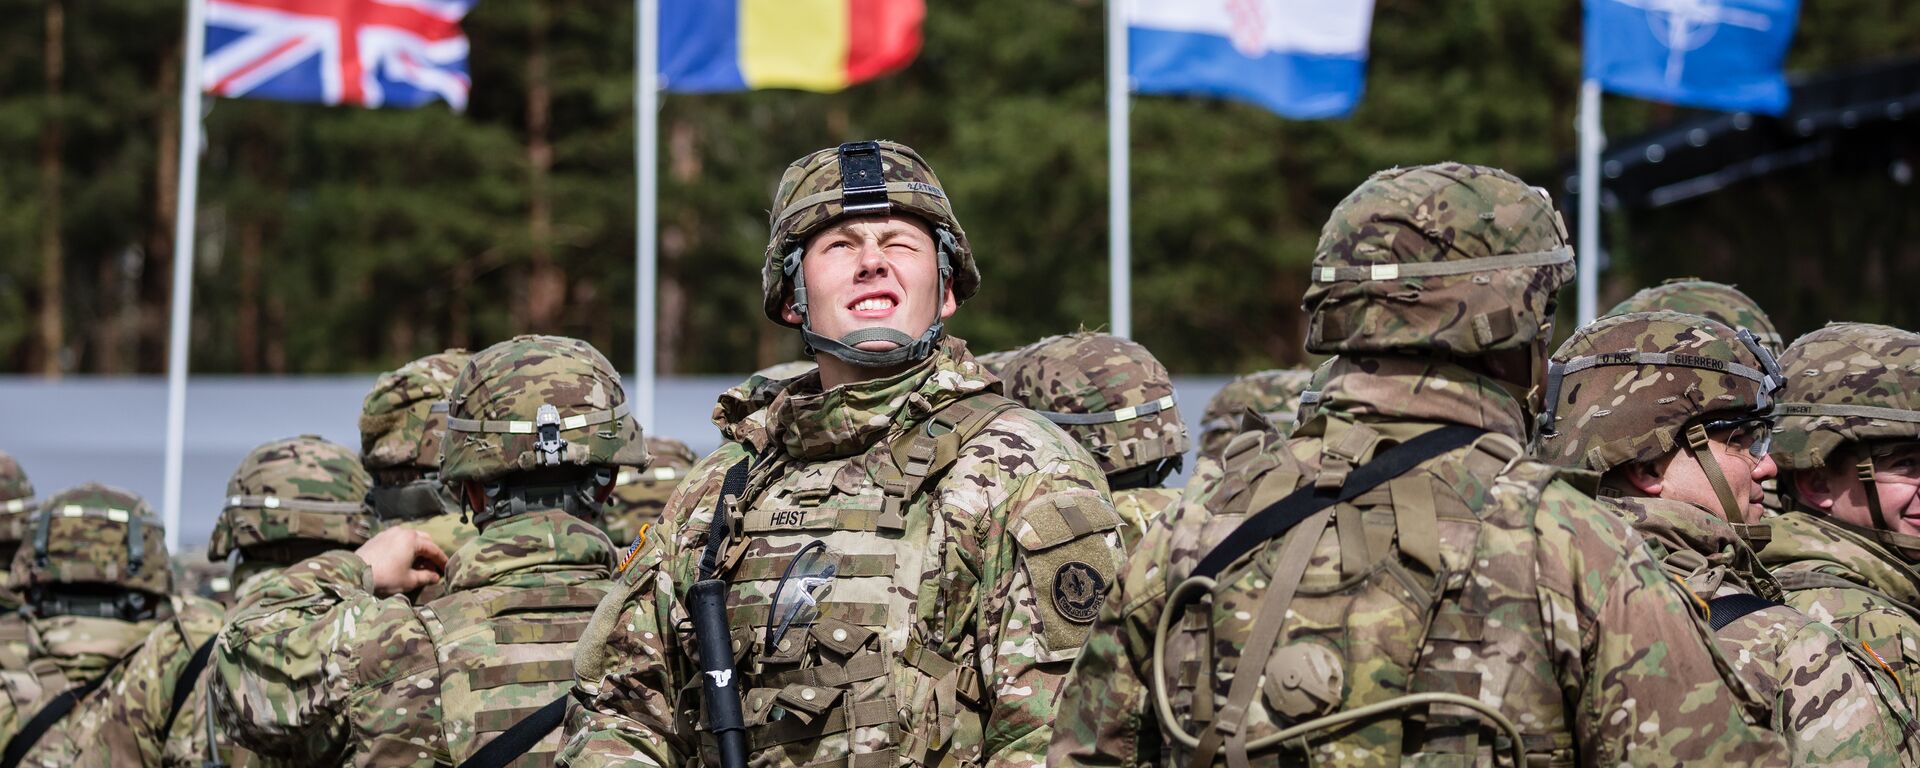 US soldiers are pictured prior the beginning of the official welcoming ceremony of NATO troops in Orzysz, Poland, on April 13, 2017. - Sputnik International, 1920, 24.01.2022